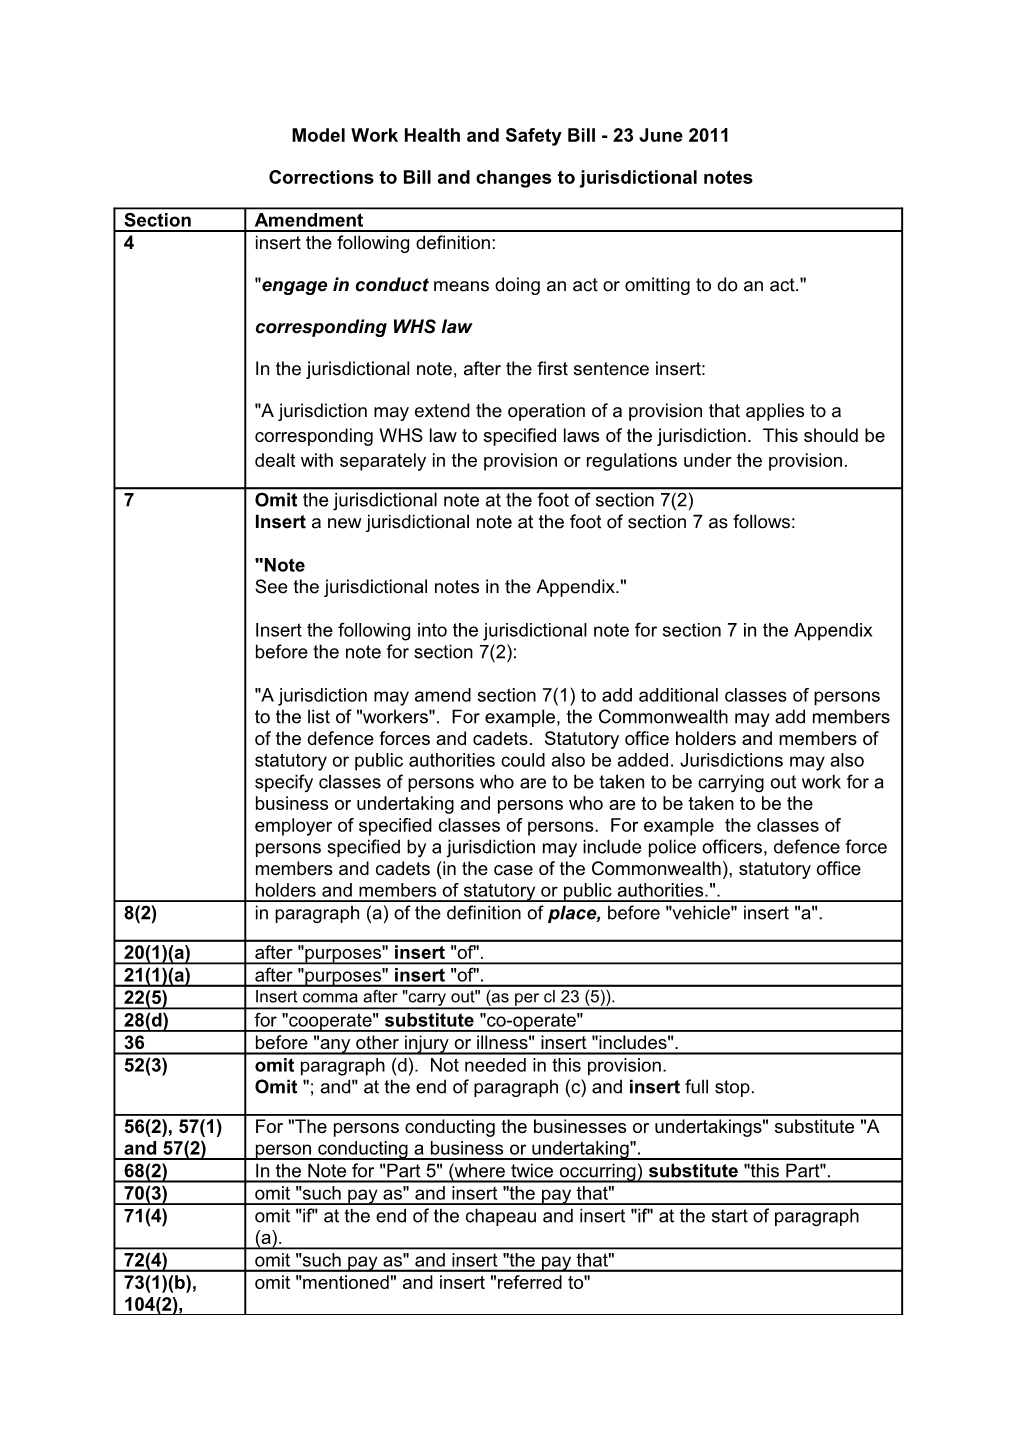 Model Work Health and Safety Act - Corrections and Changes to Jurisdictional Notes - 23